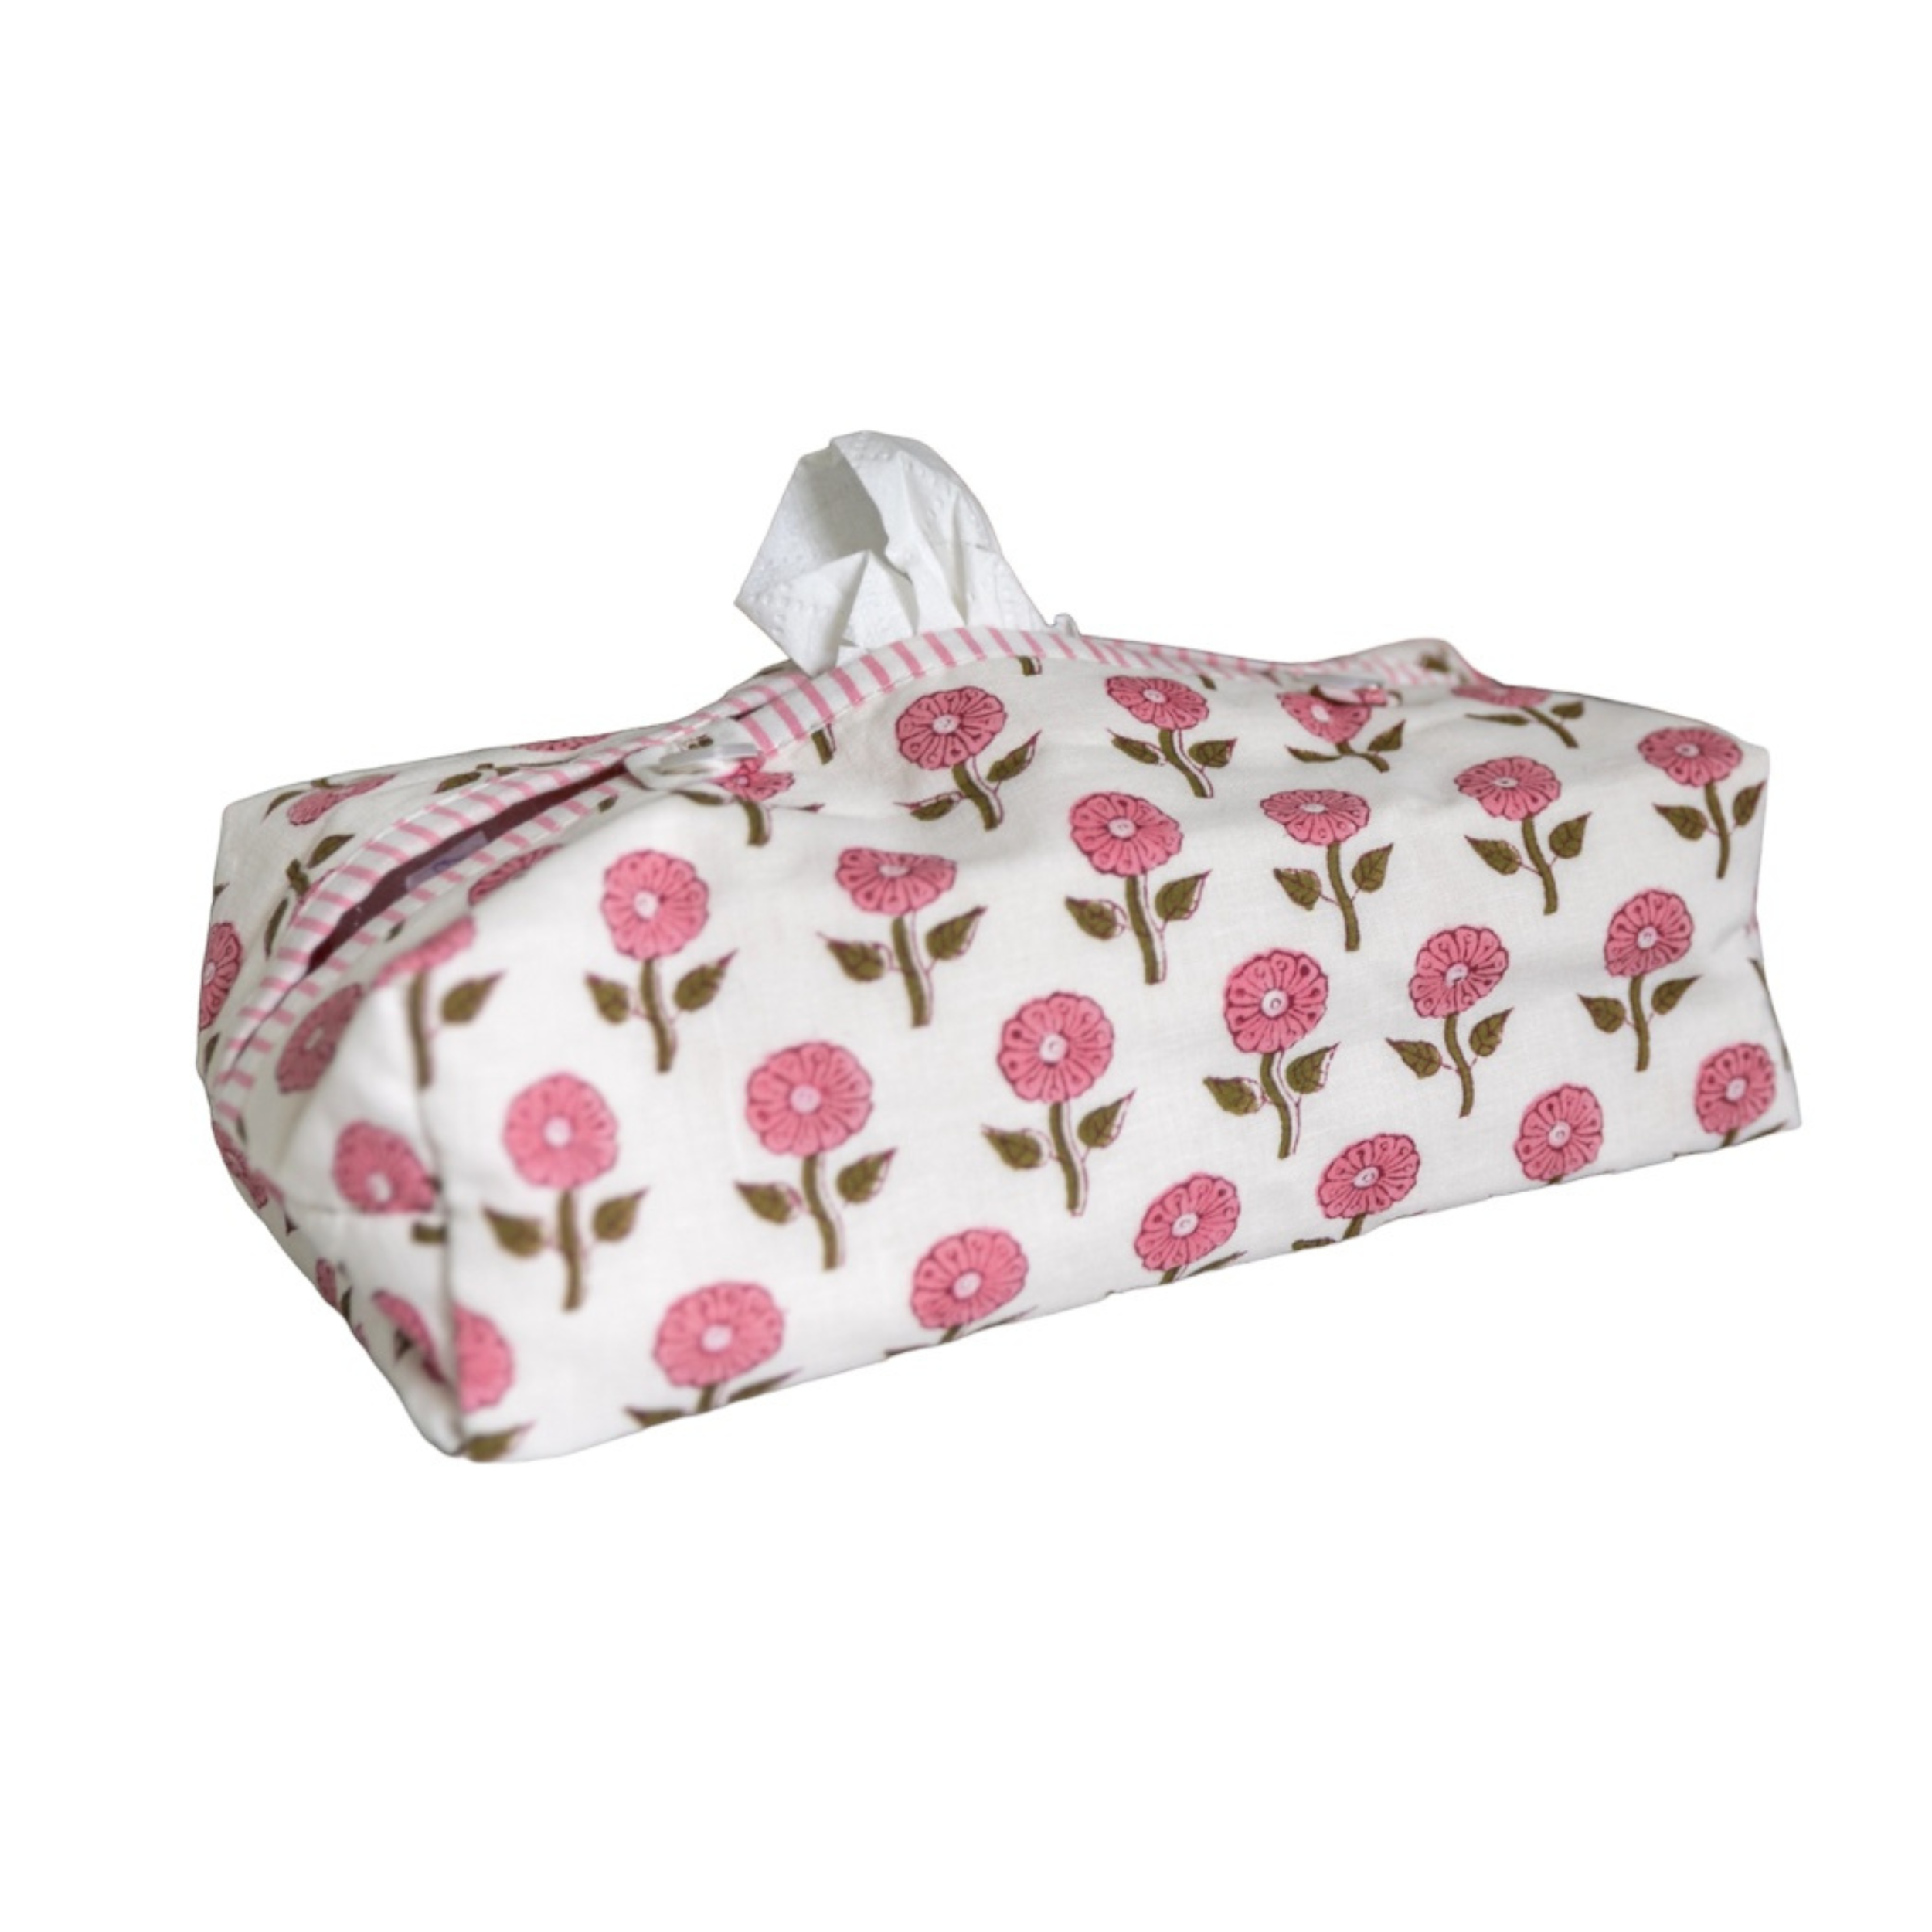 Daisy Pink Fabric Tissue Box Cover